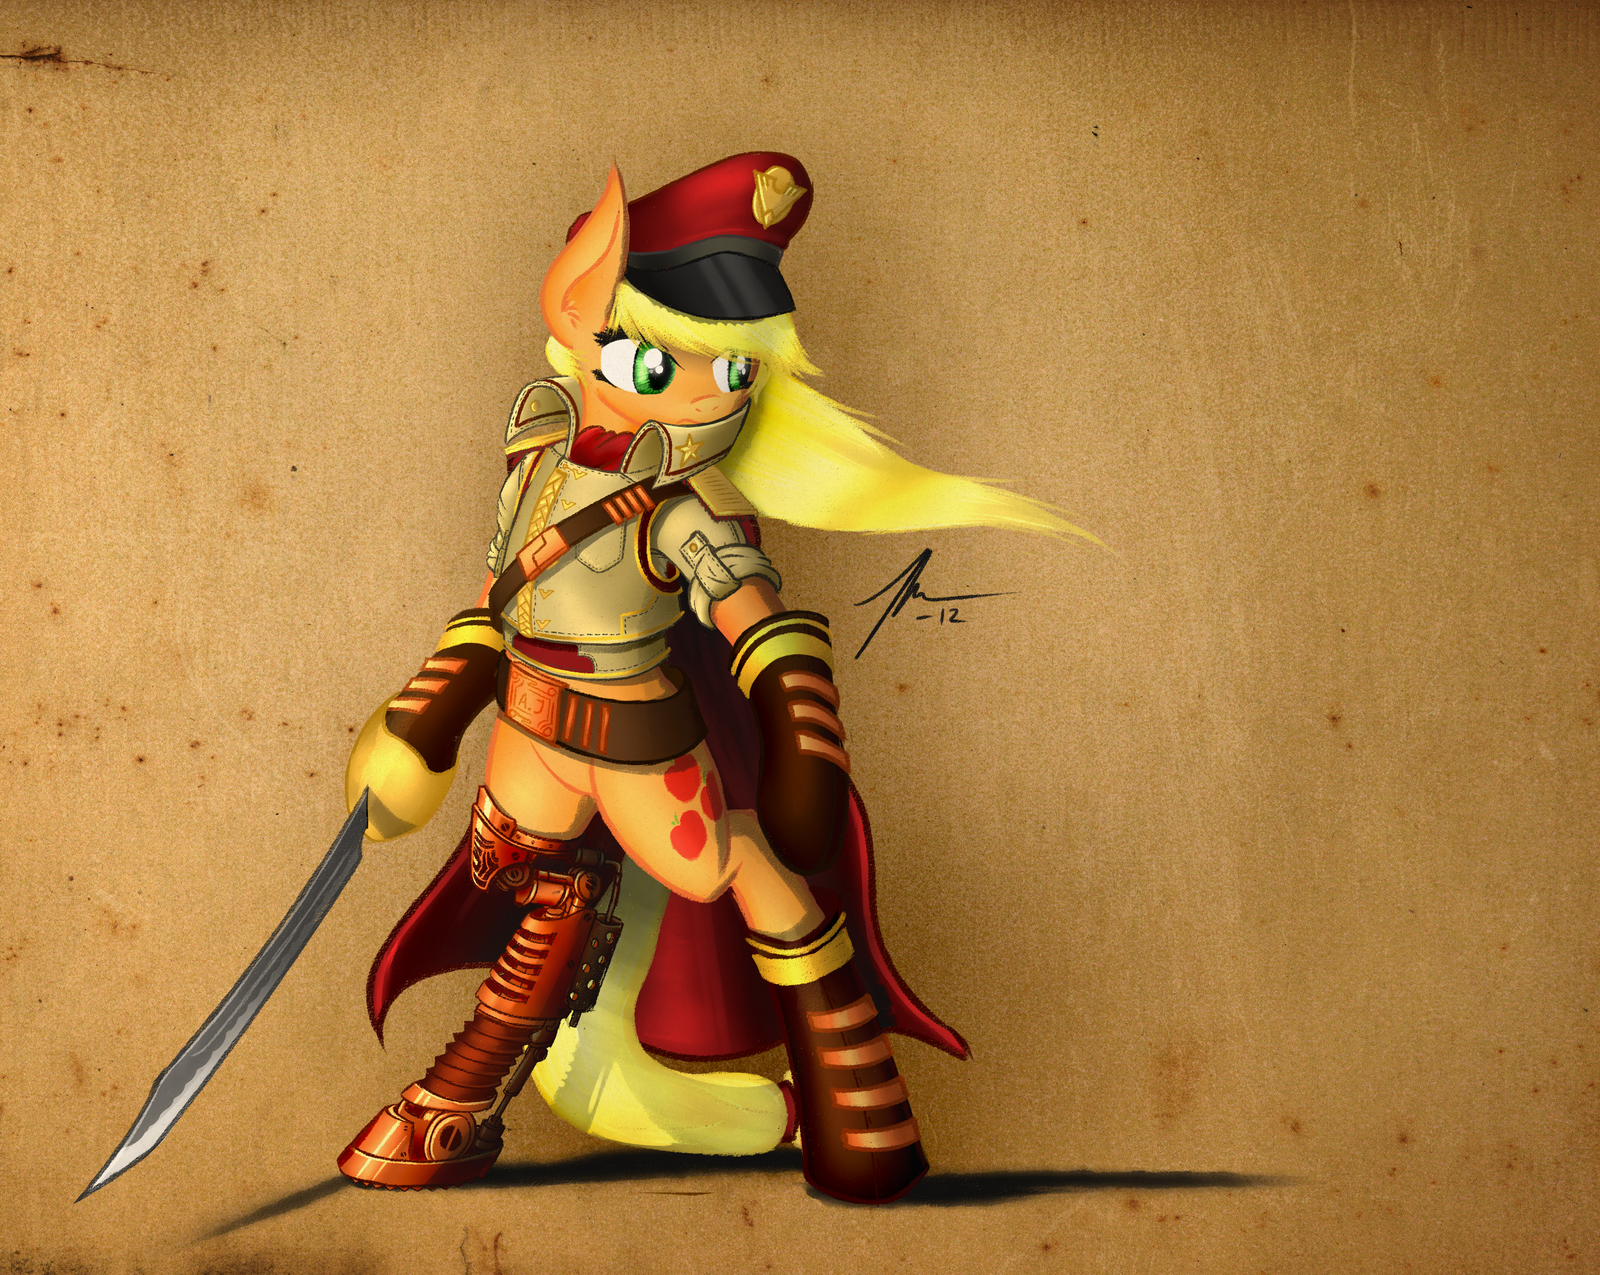 admiral_applejack_by_wreky-d5df0dy.png